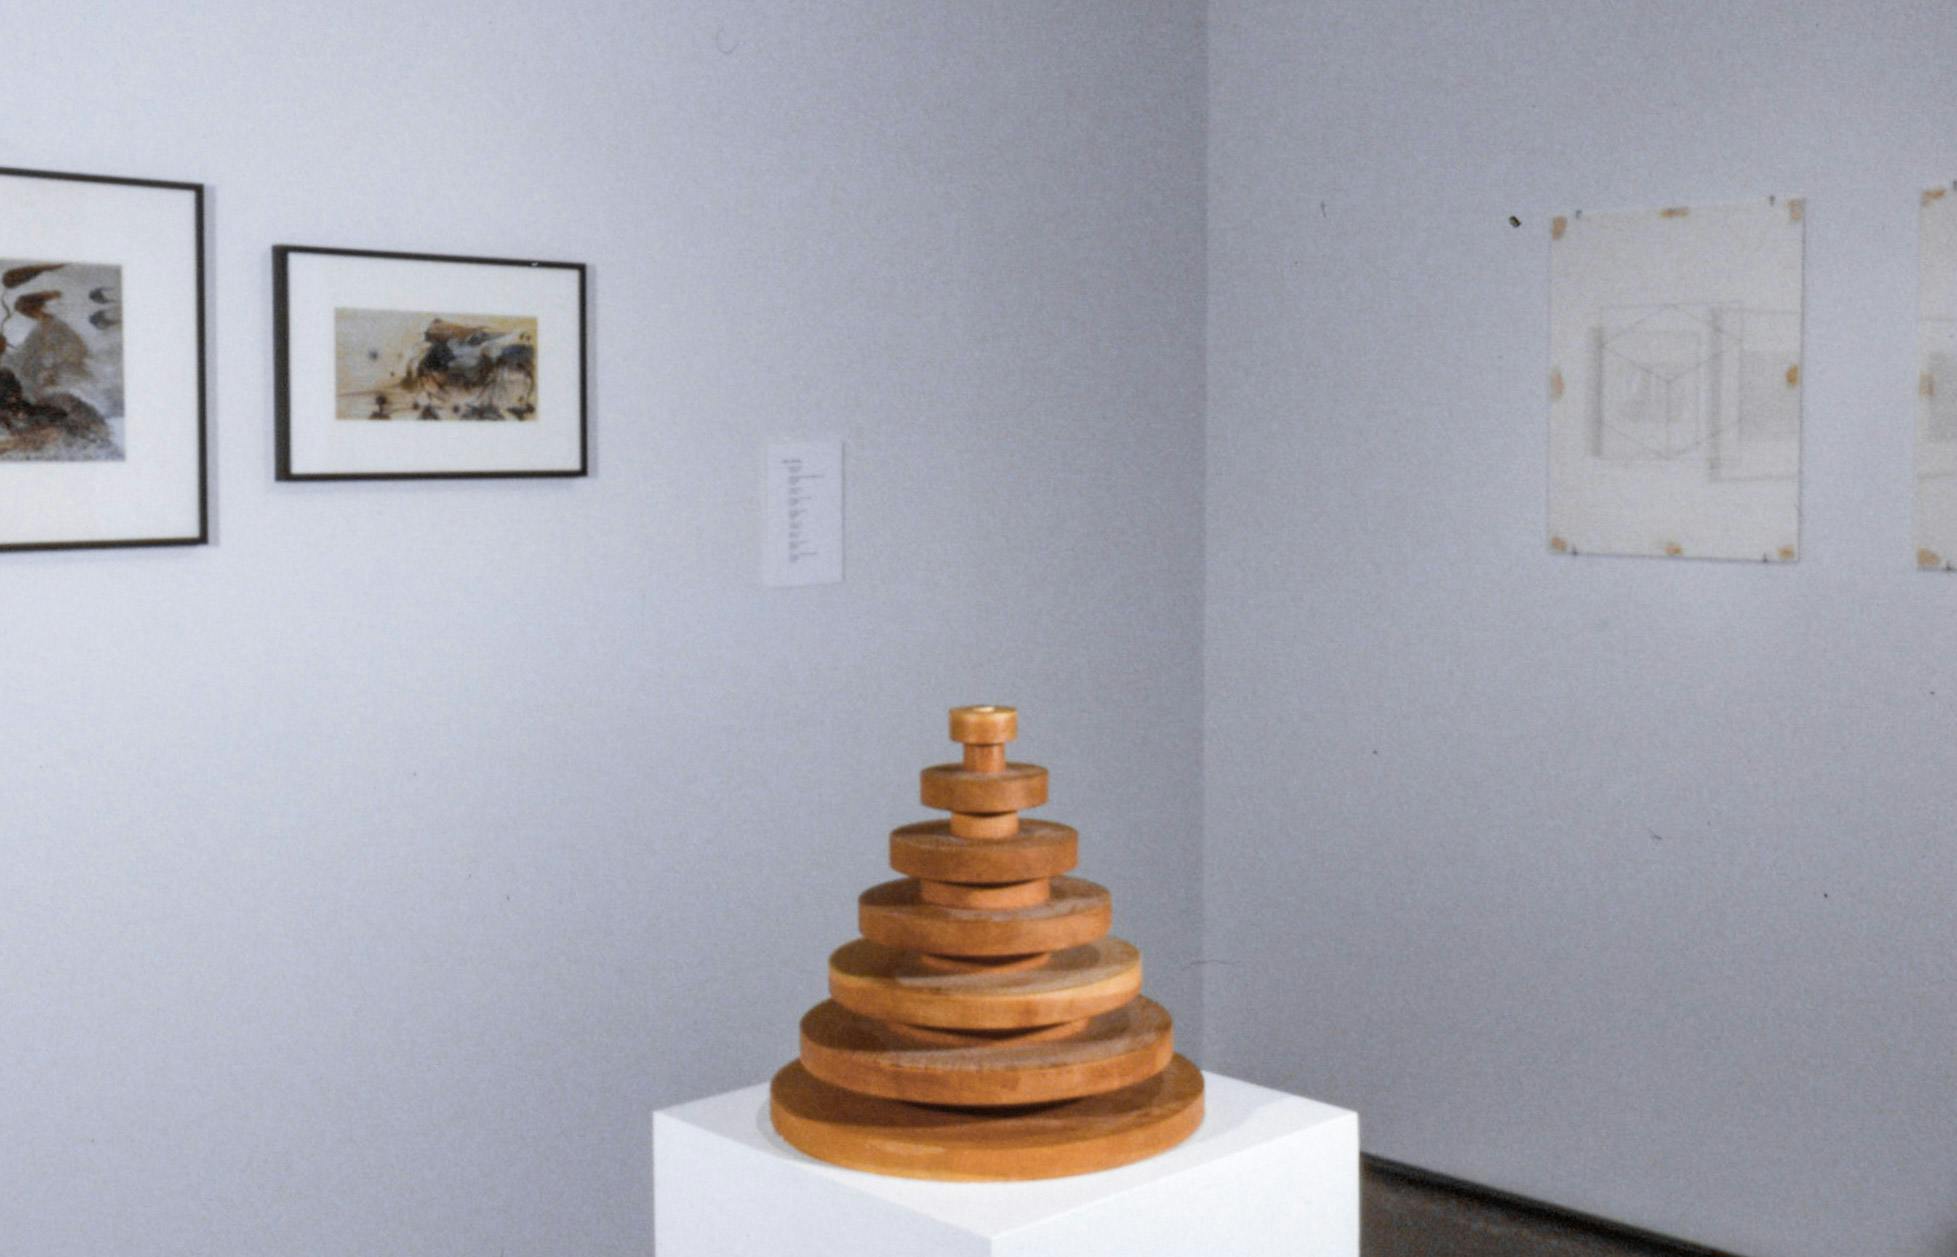 A coil-shaped wood sculpture is placed on a pedestal. Two coloured prints and a pair of black and white drawings are mounted on the wall behind this wood sculpture.  